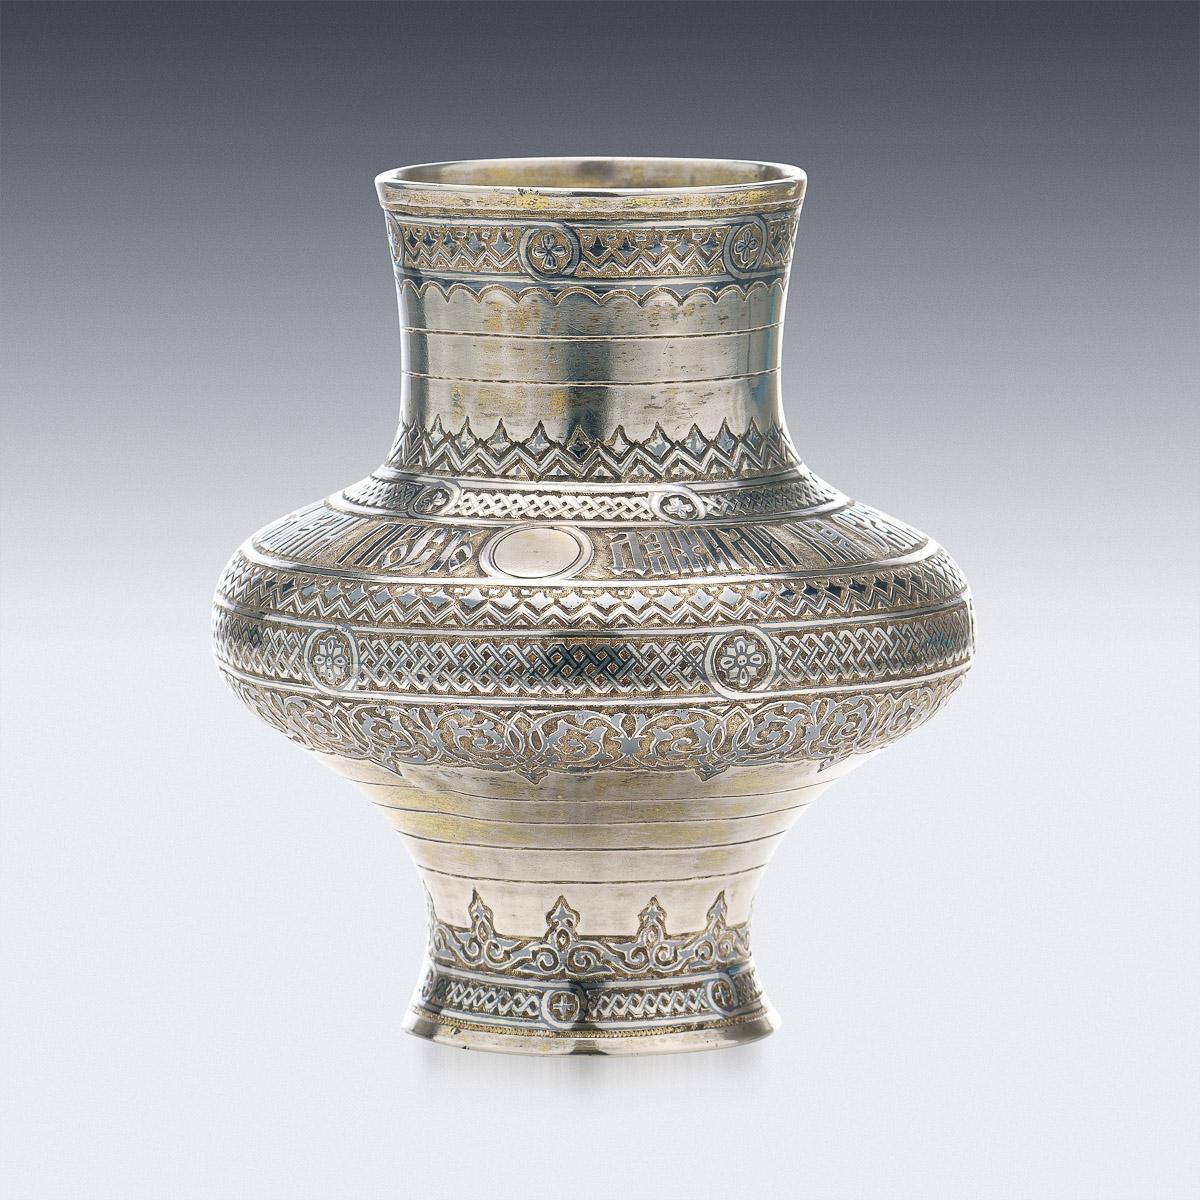 19th Century Russian silver-gilt trompe l'oeil kvas jug, of heavy gauge, of traditional form, applied with a plain handle and elaborately decorated with Pan-Slavic motives, applied with niello enamel and partialy gilt.
Hallmarked Russian Silver 84